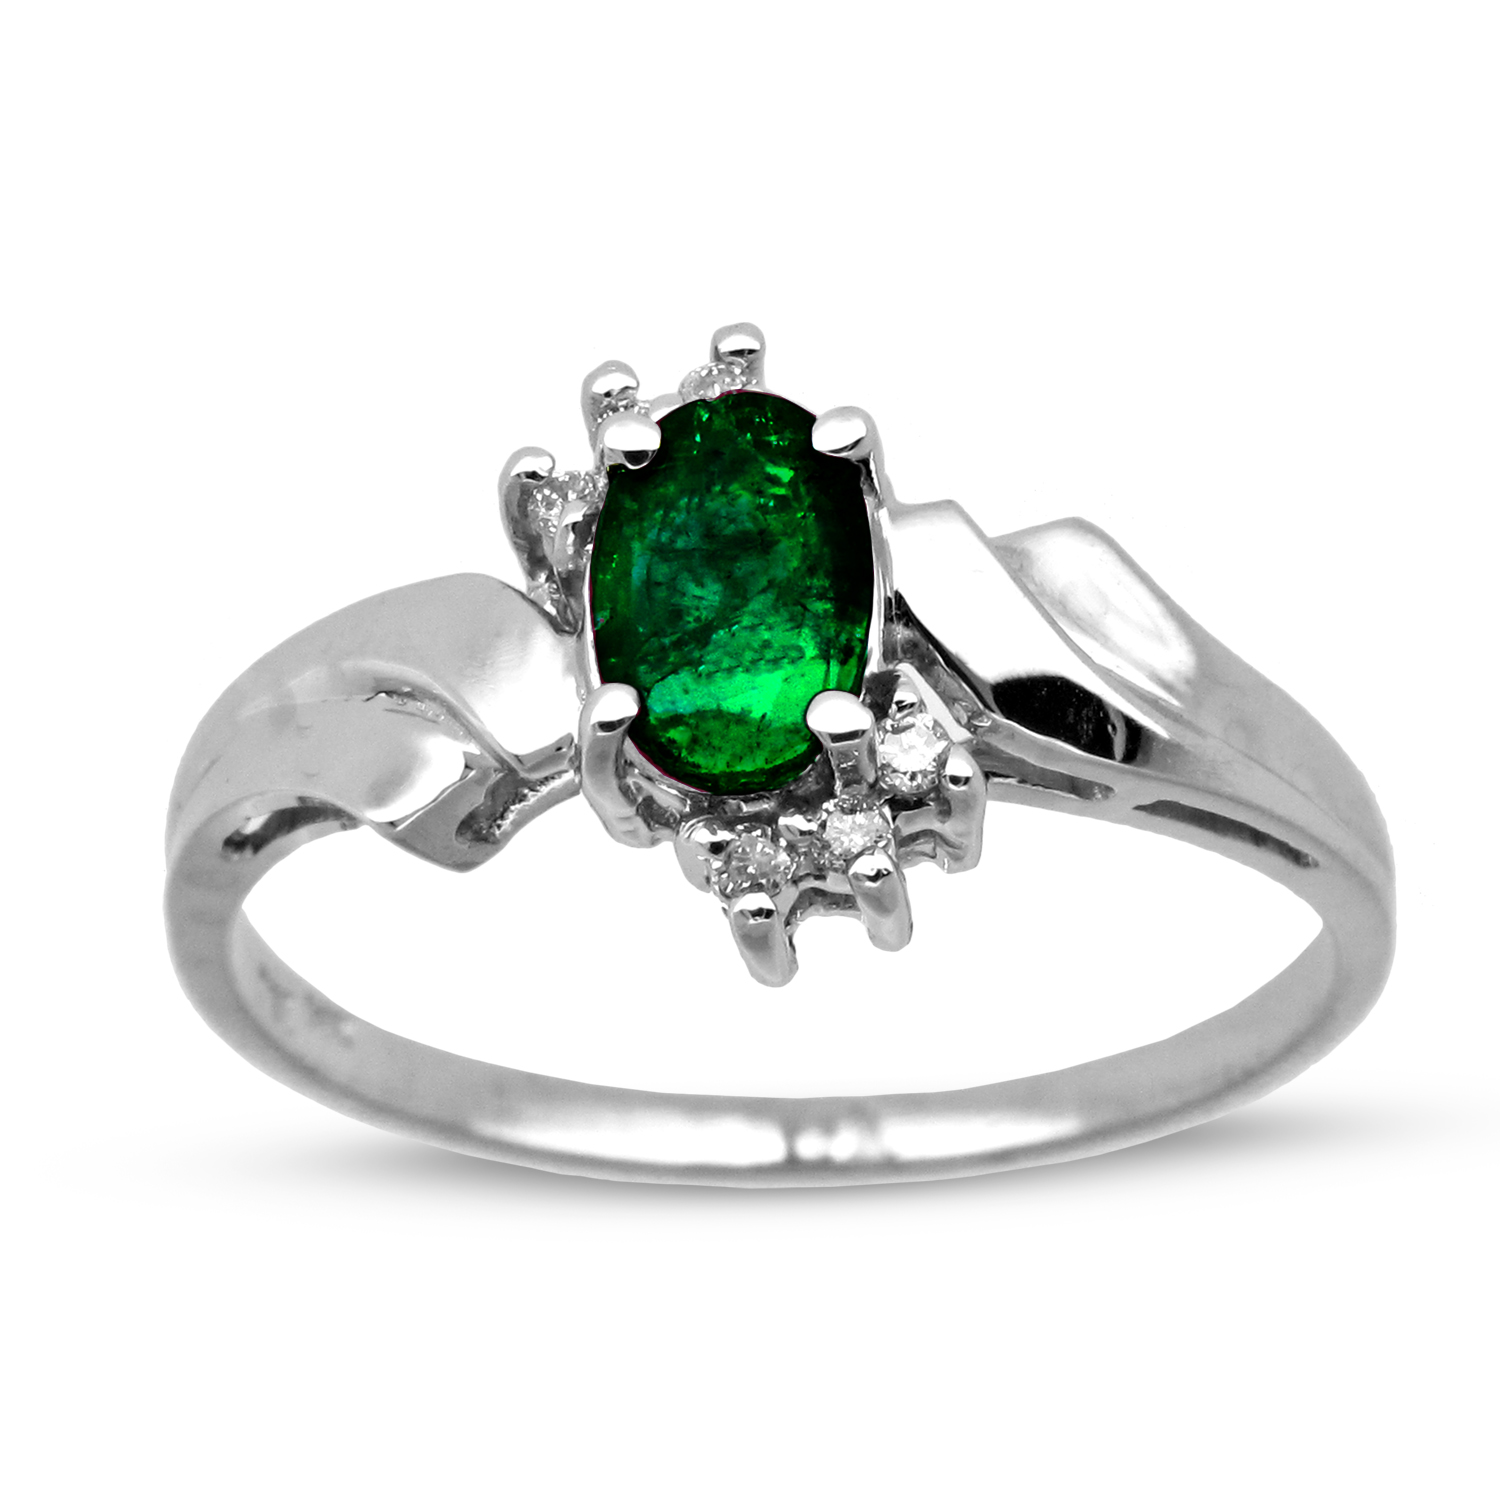 0.48cttw Emerald and Diamond Fashion Ring set in 14k Gold